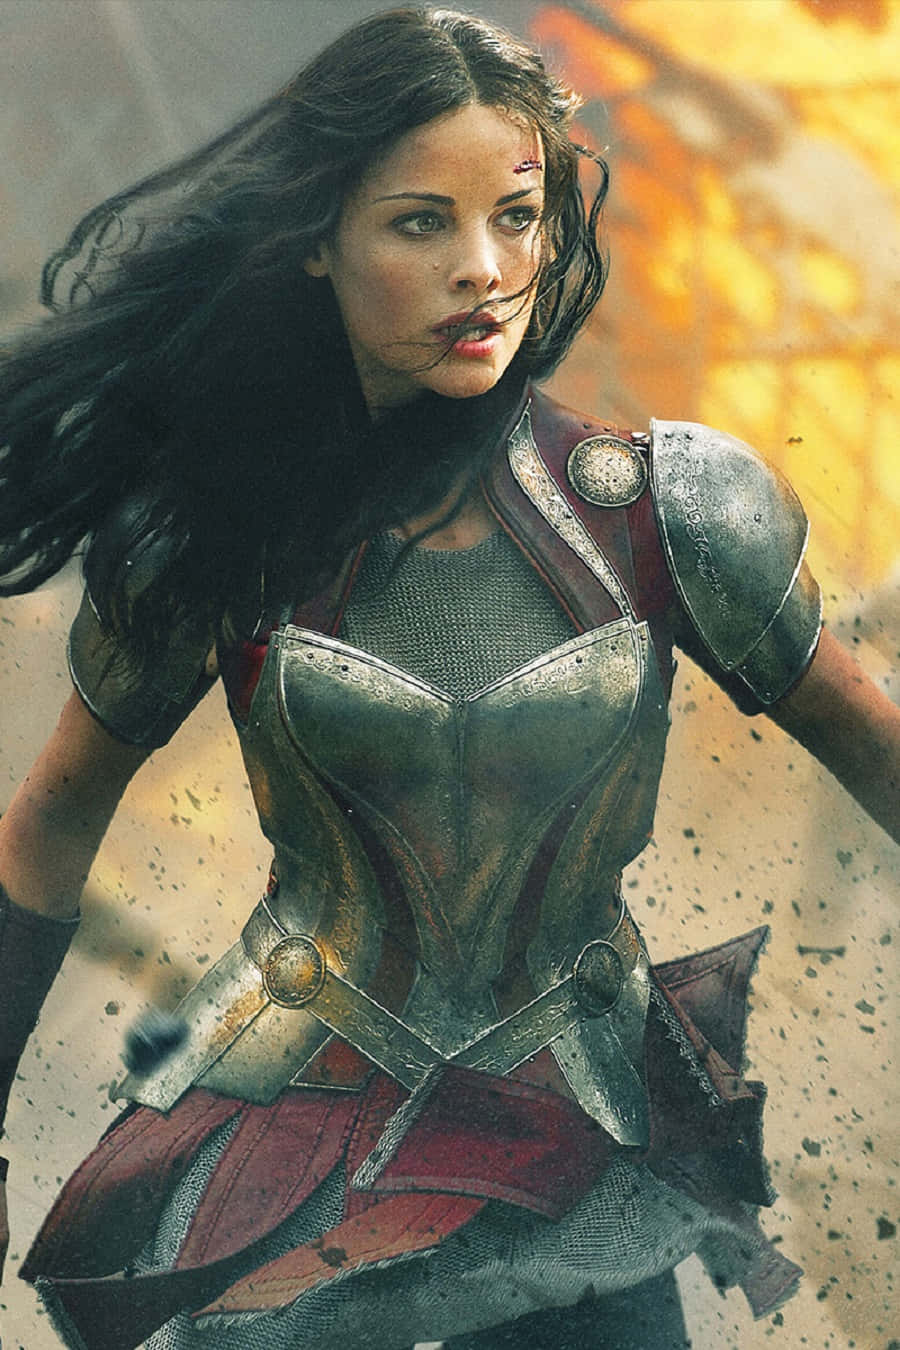 Lady Sif, a powerful Asgardian warrior, defends against evil forces. Wallpaper